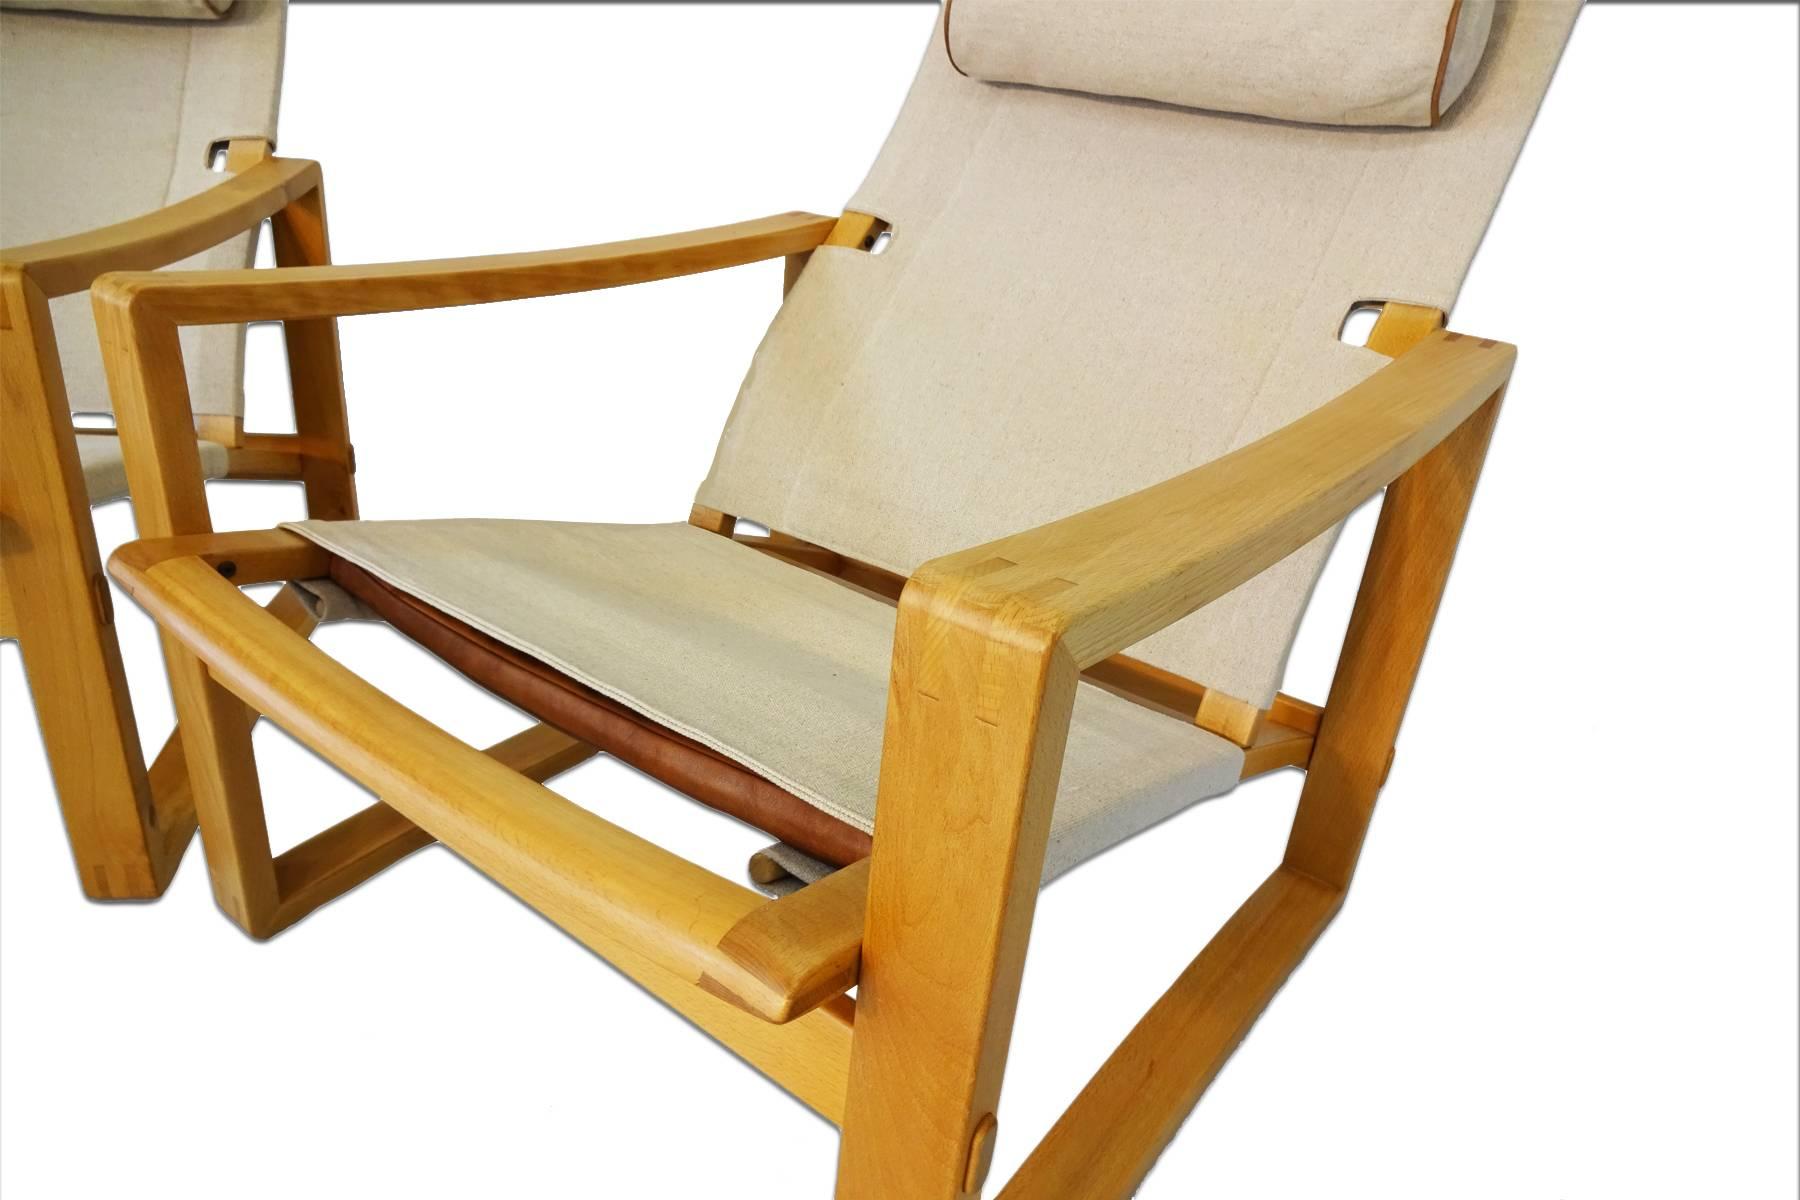 Originally produced in the mid-1960s these chairs are a development of Børge Jensen & Sønner’s ‘Safari’ chair into a more comfortable and beautifully appointed lounge chair. Featuring a cross bar at the top (an addition to the original chair